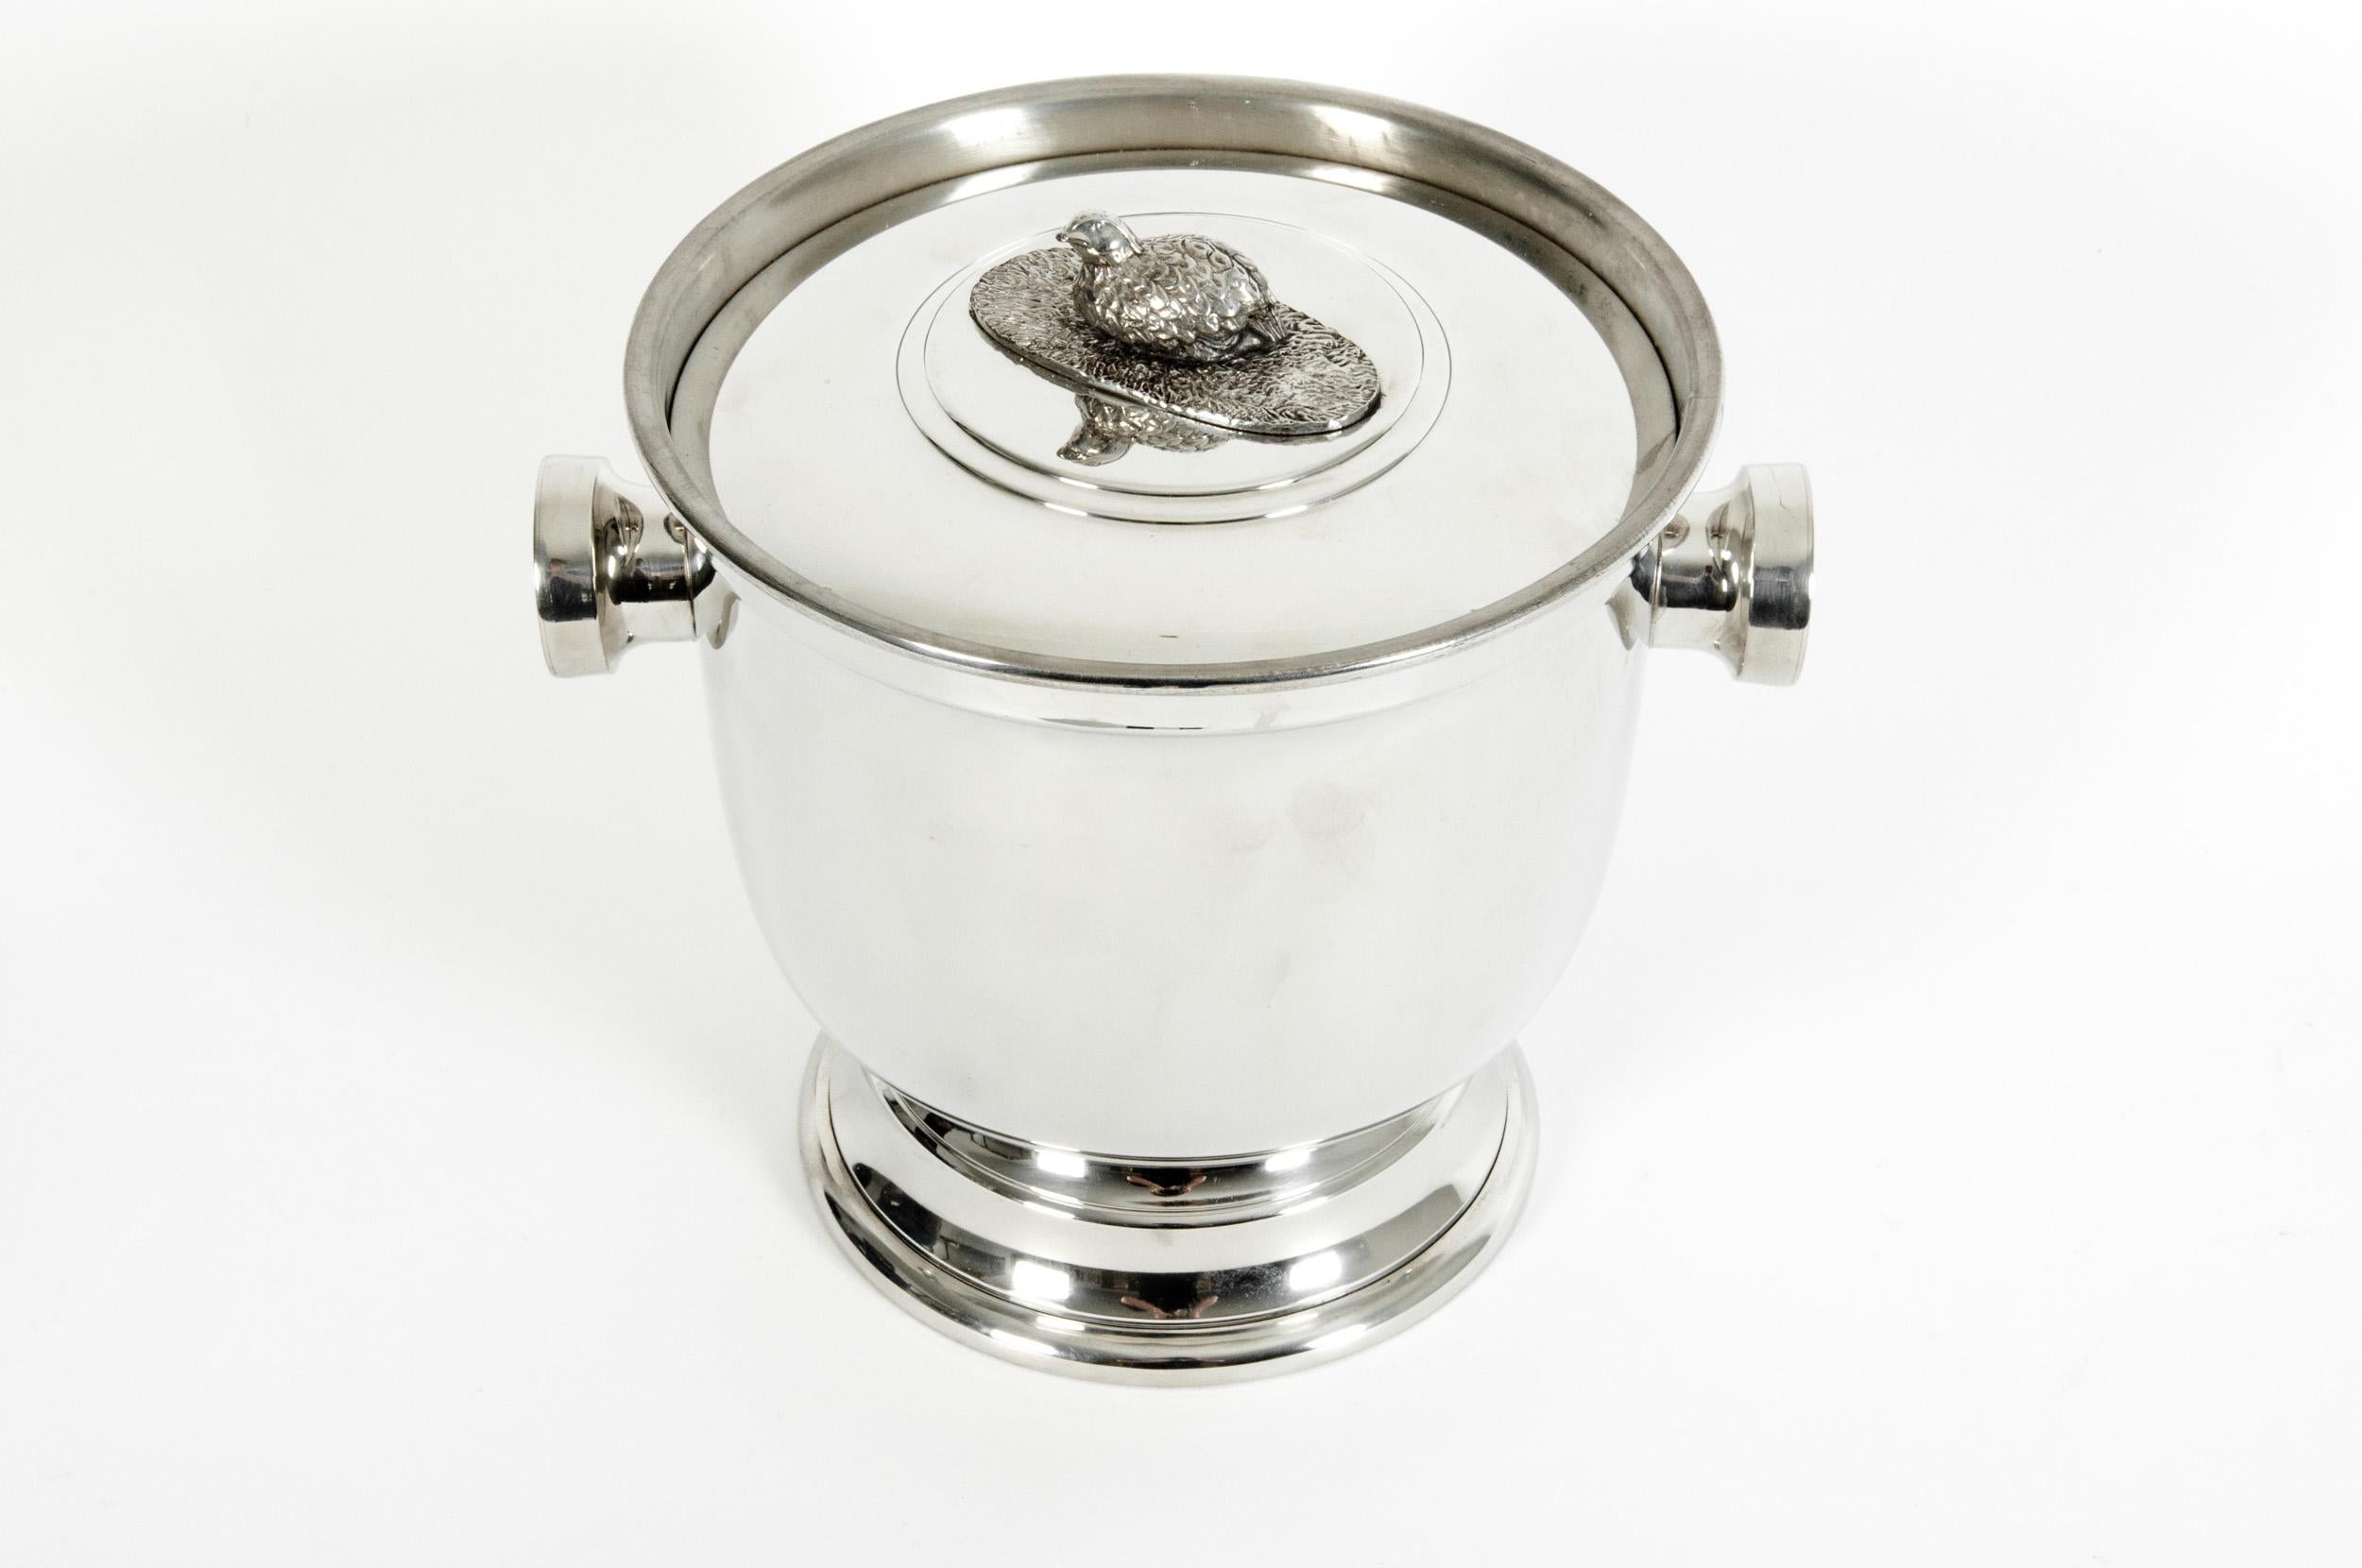 English Sheffield barware / tableware silver plated covered ice bucket with two side handles. The ice bucket is in great condition. Minor wear consistent with age / use. Maker's mark undersigned. The ice bucket Stand about 11 inches diameter x 8.5